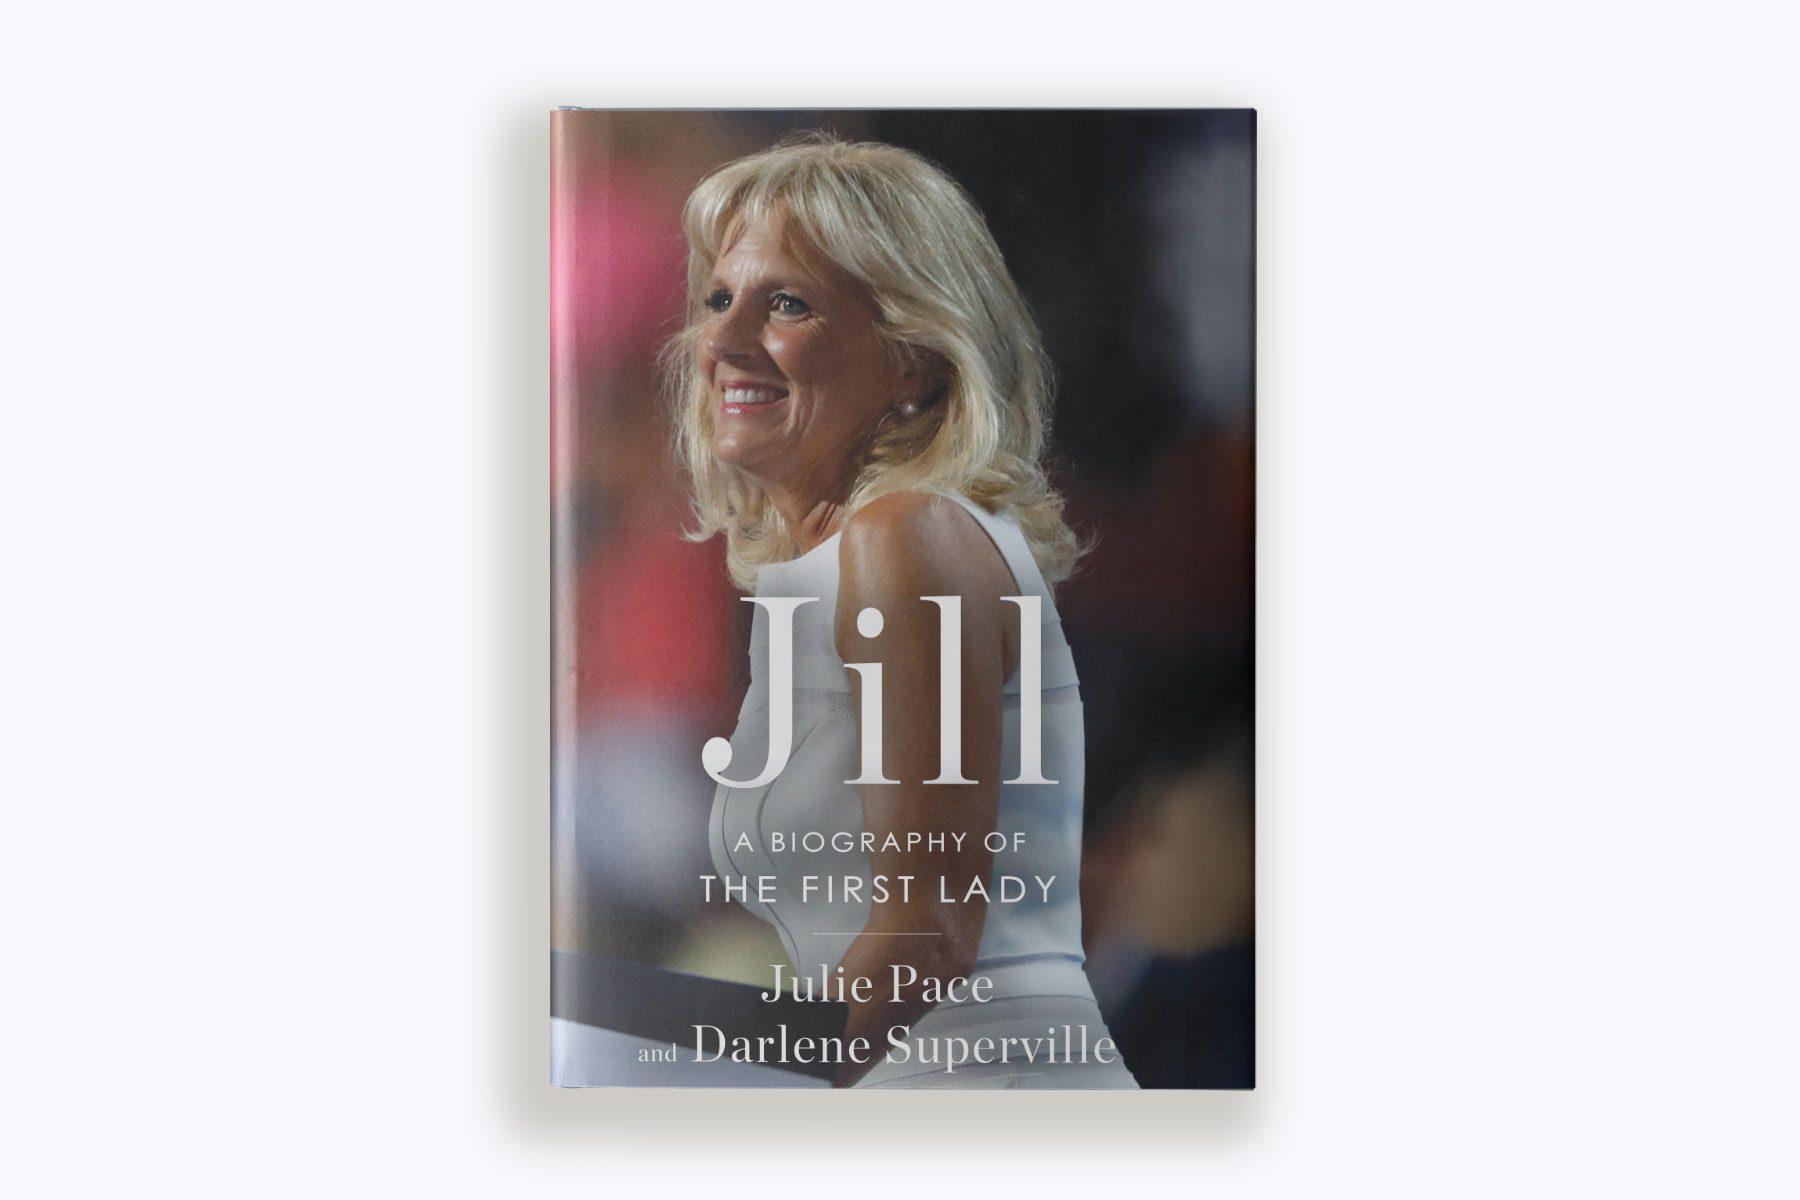 The cover of "Jill: A biography of the First Lady" by Julie Pace and Darlene Superville.